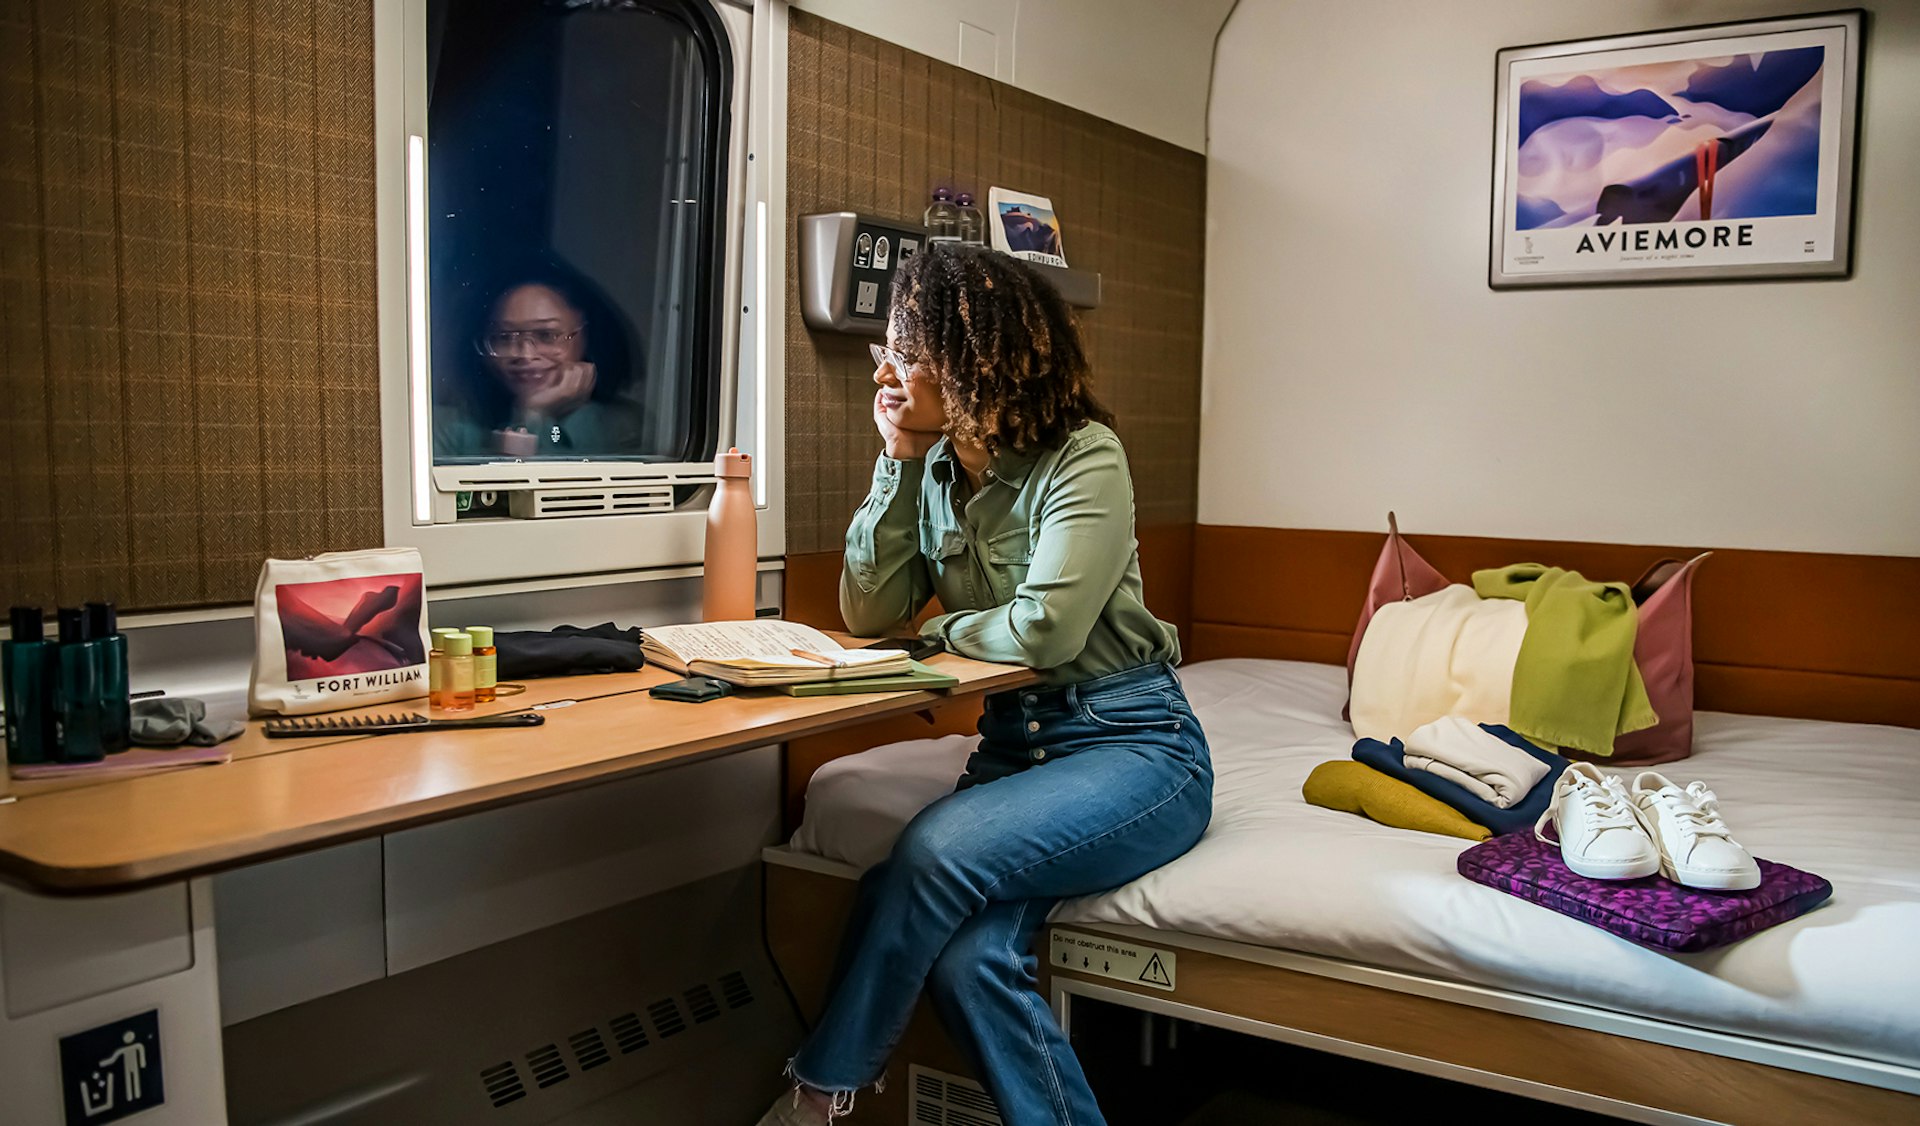 A woman looks out the window in a Caledonian Double room aboard the Caledonian Sleeper overnight train between London and Scotland